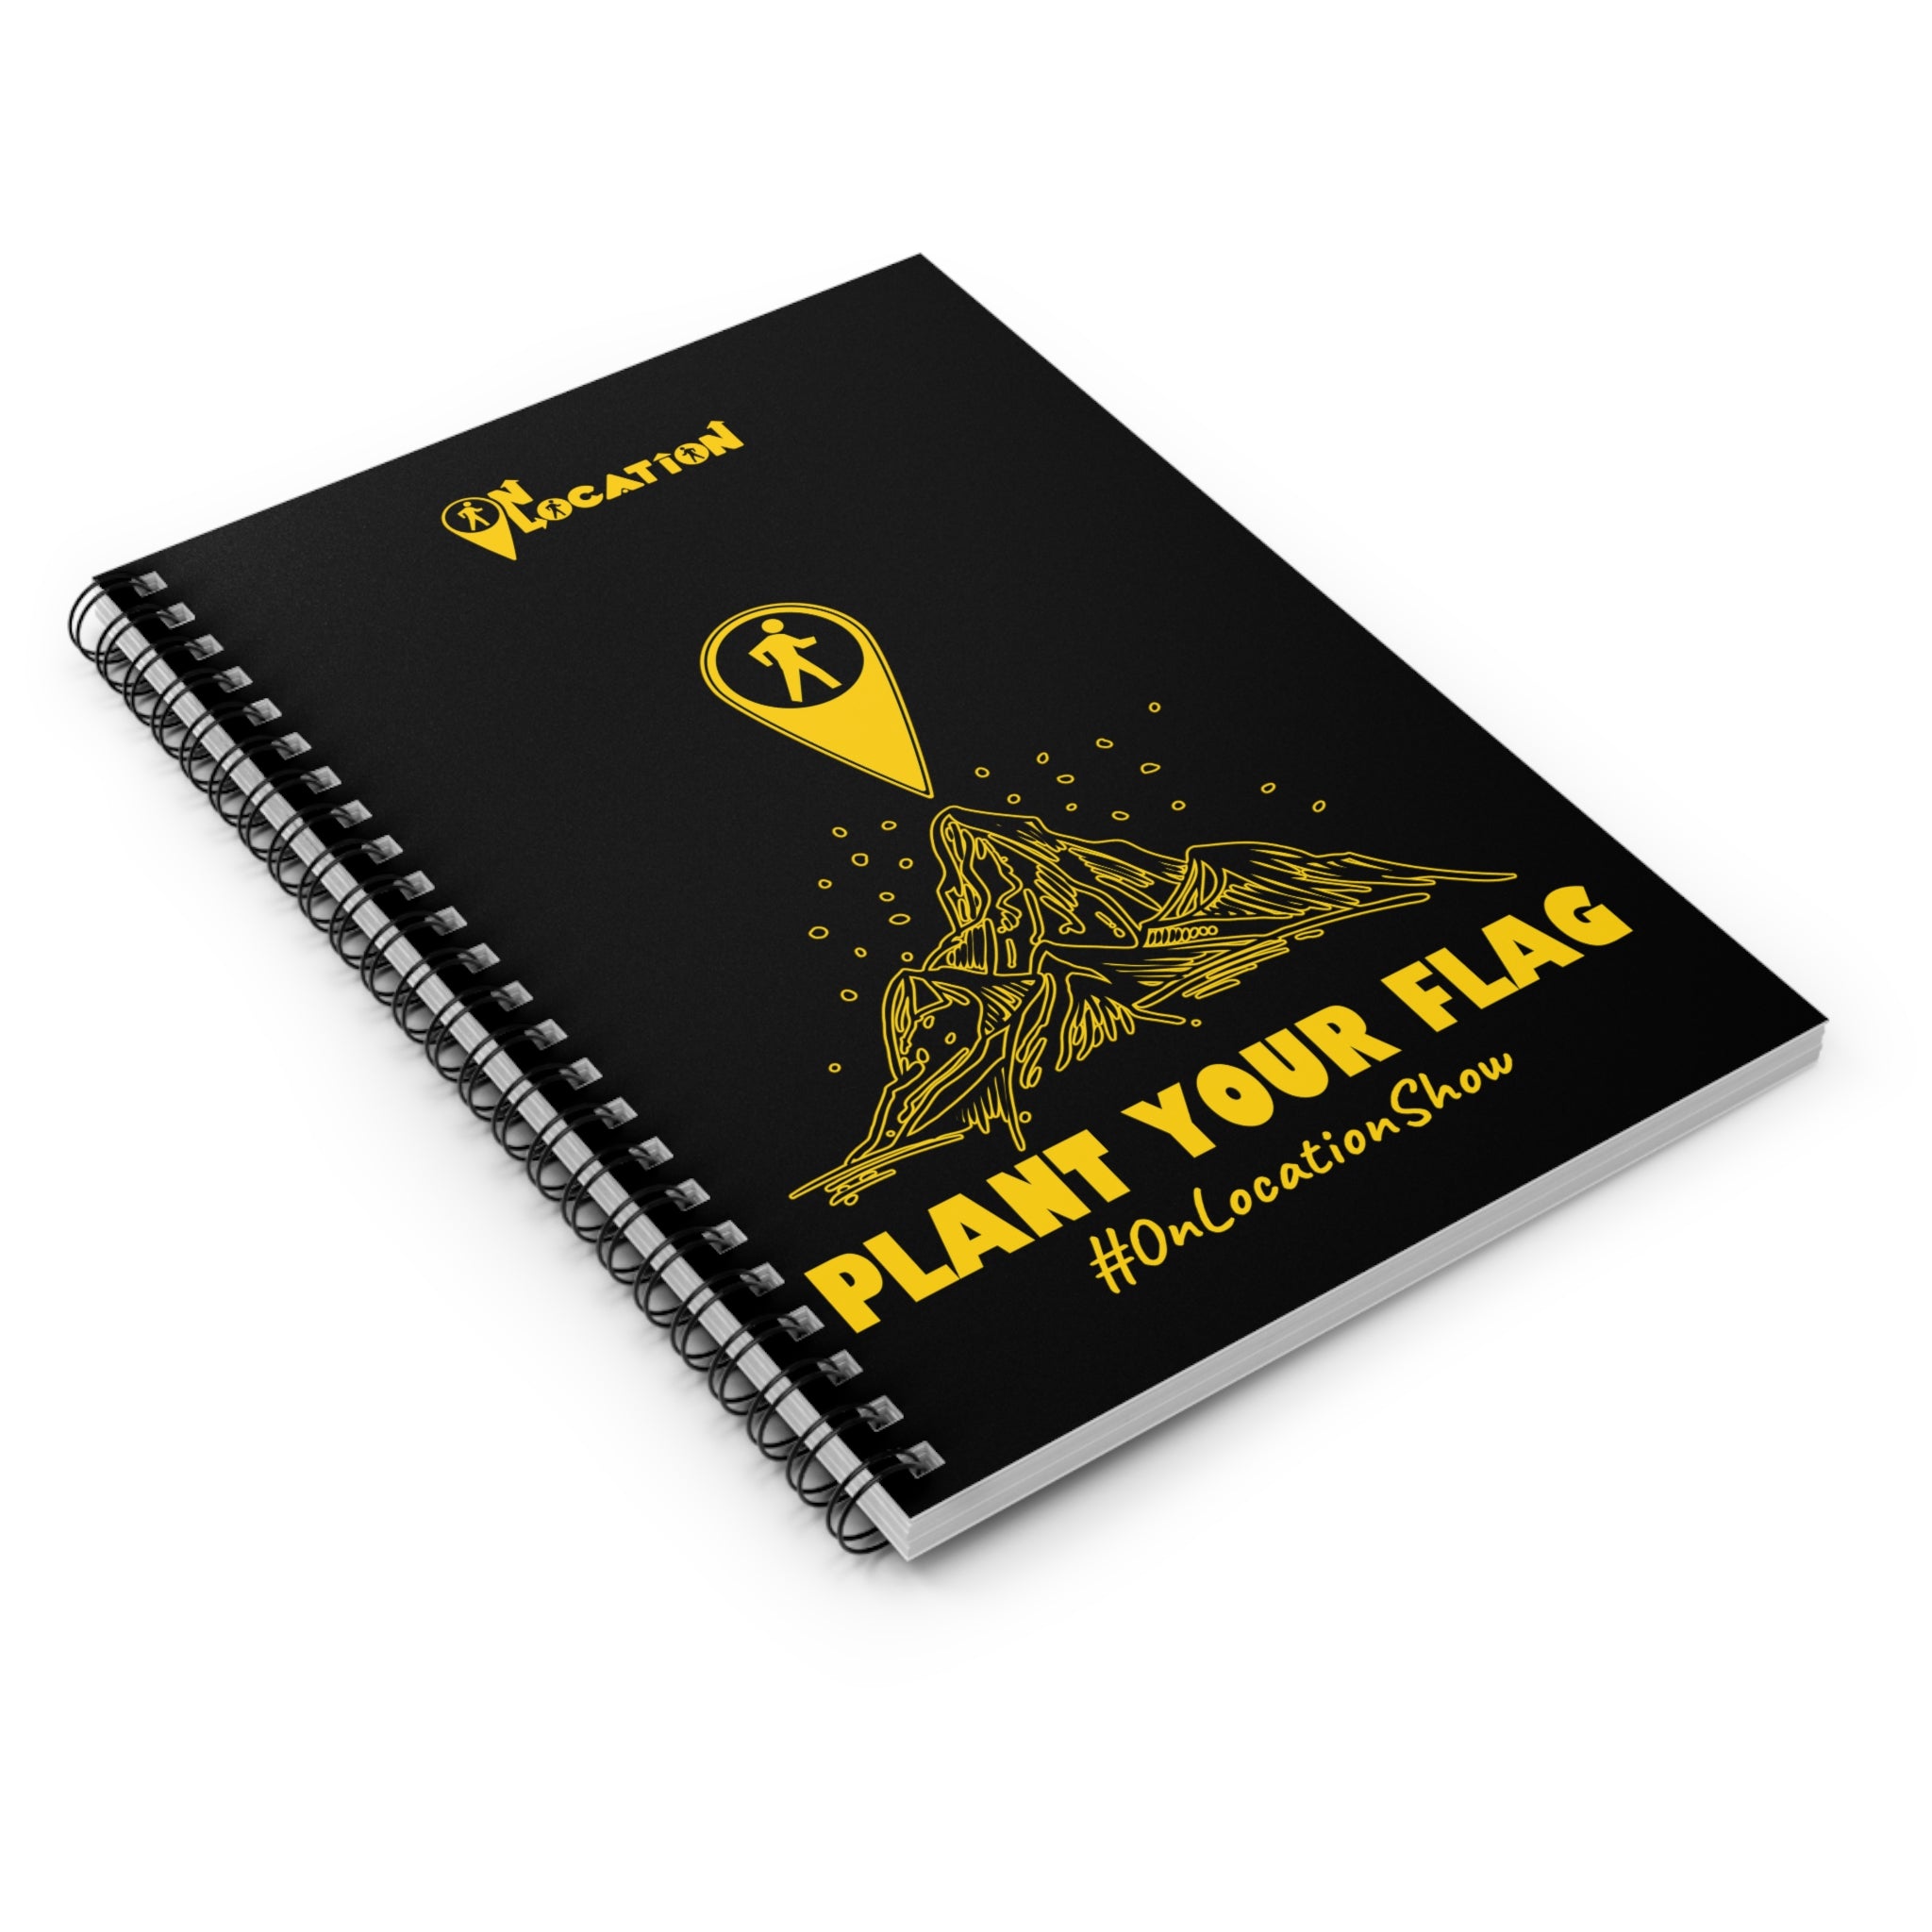 Plant Your Flag Spiral Notebook